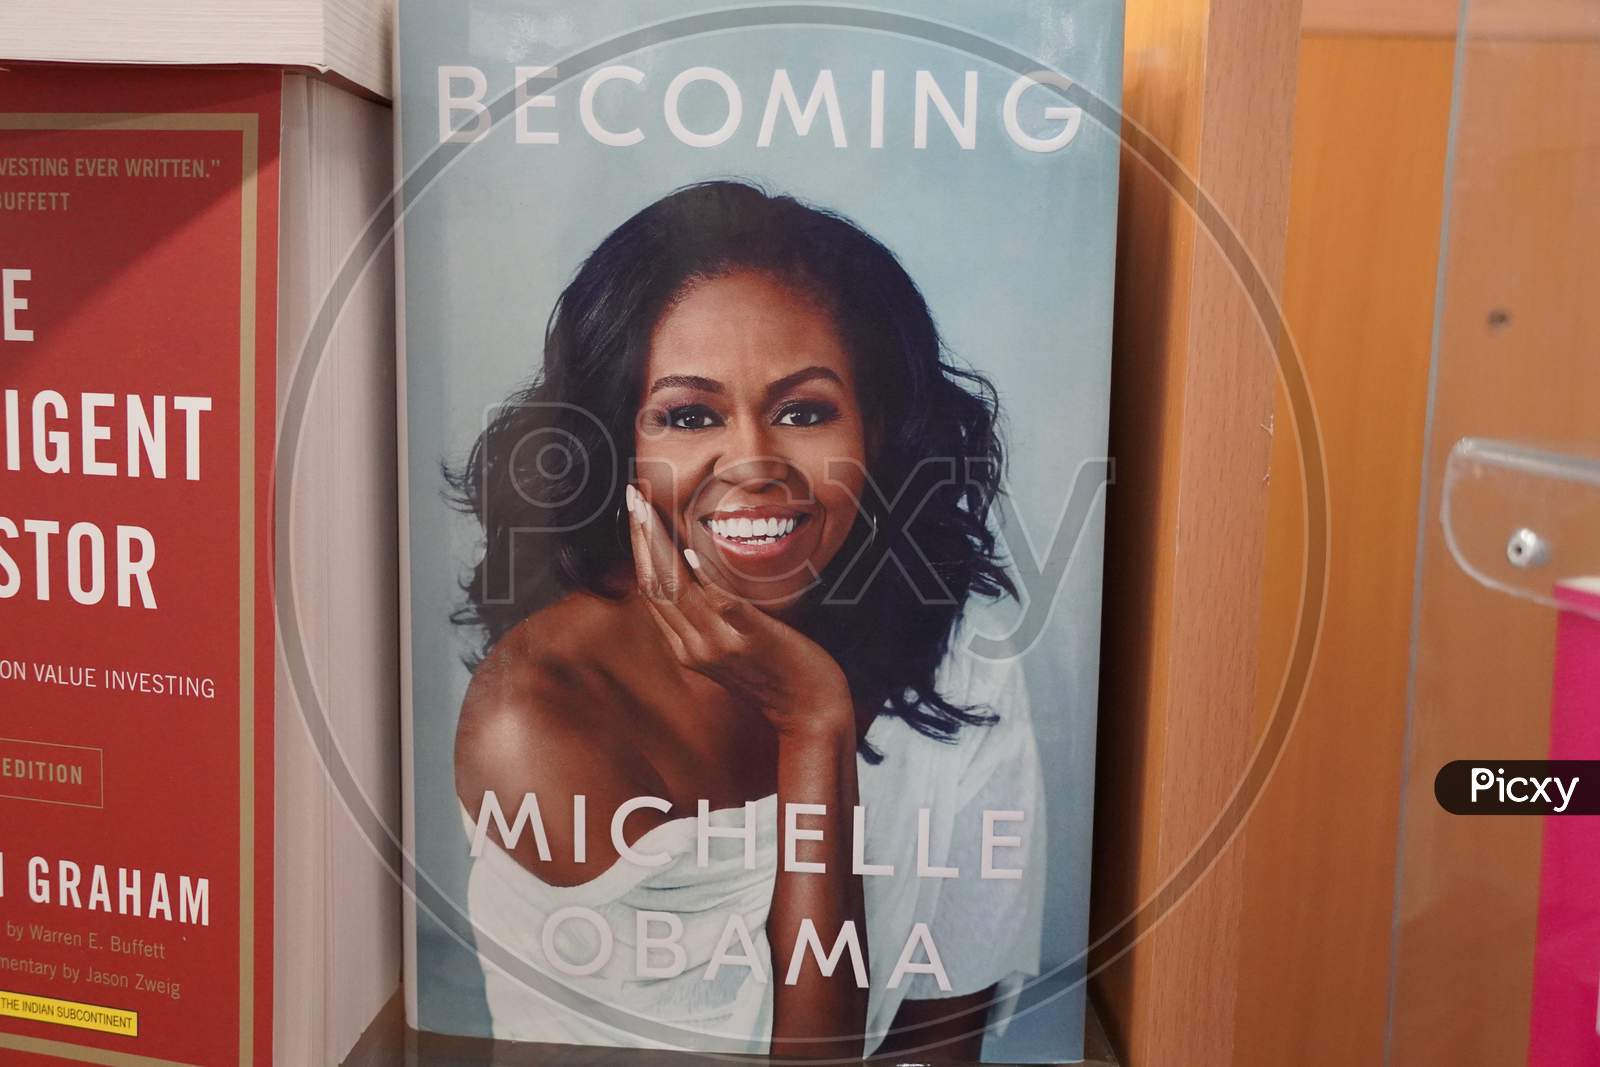 Becoming book written by Michelle Obama at the bookstore. Books by Michelle Obama displayed on the shelves of a book shop. Library - Kochi, India: January 2020